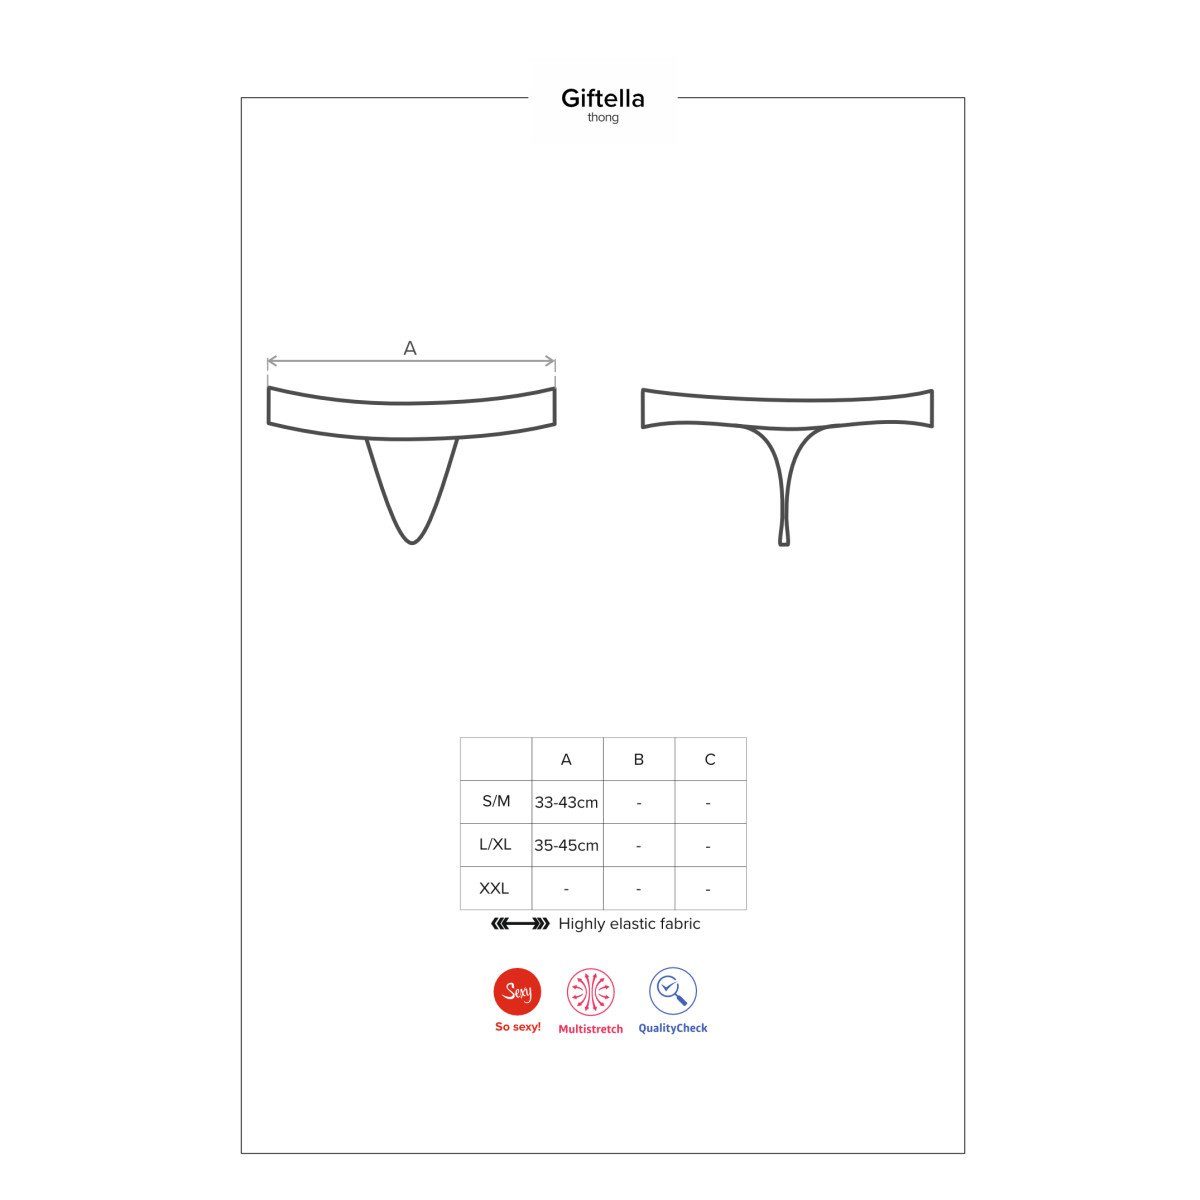 OB Panty - red Obsessive (L/XL,S/M) Giftella thong